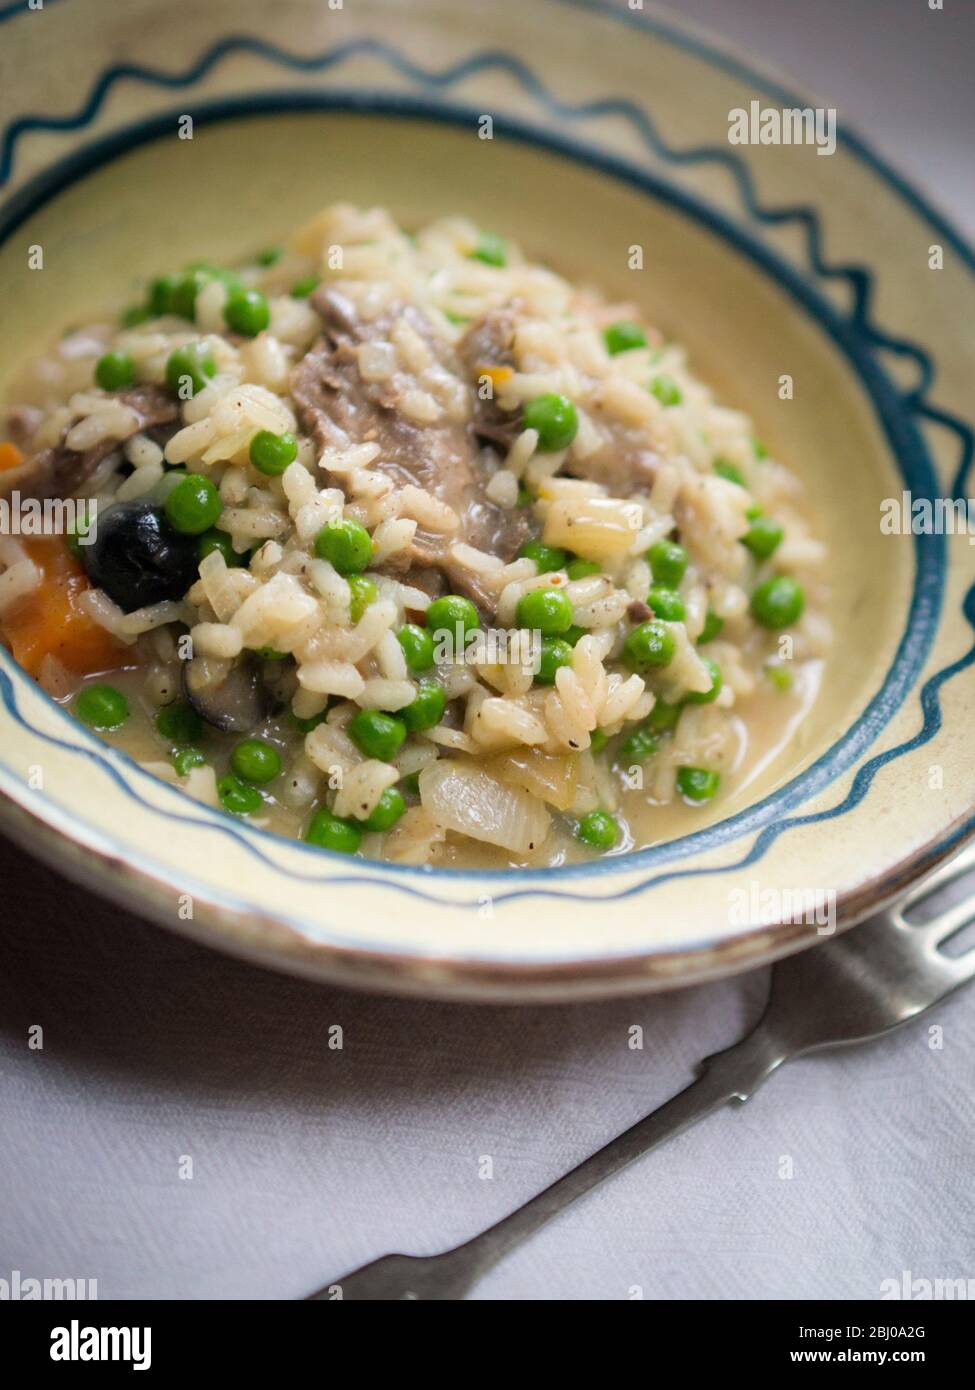 Risotto made from leftovers from wild duck braised with olives. Stock Photo